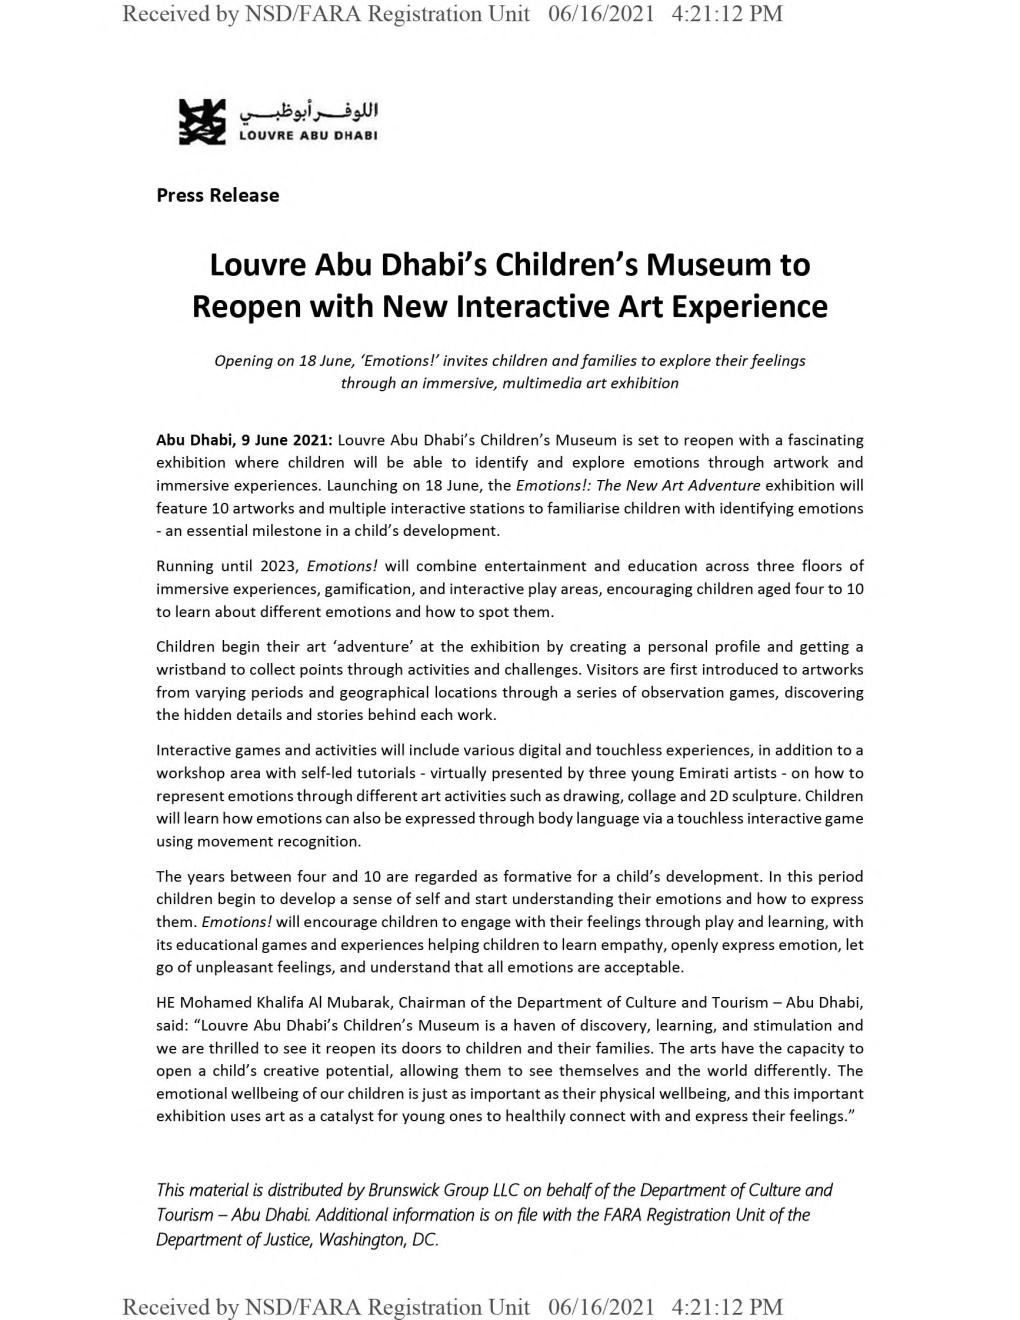 Louvre Abu Dhabi's Children's Museum to Reopen with New Interactive Art Experience